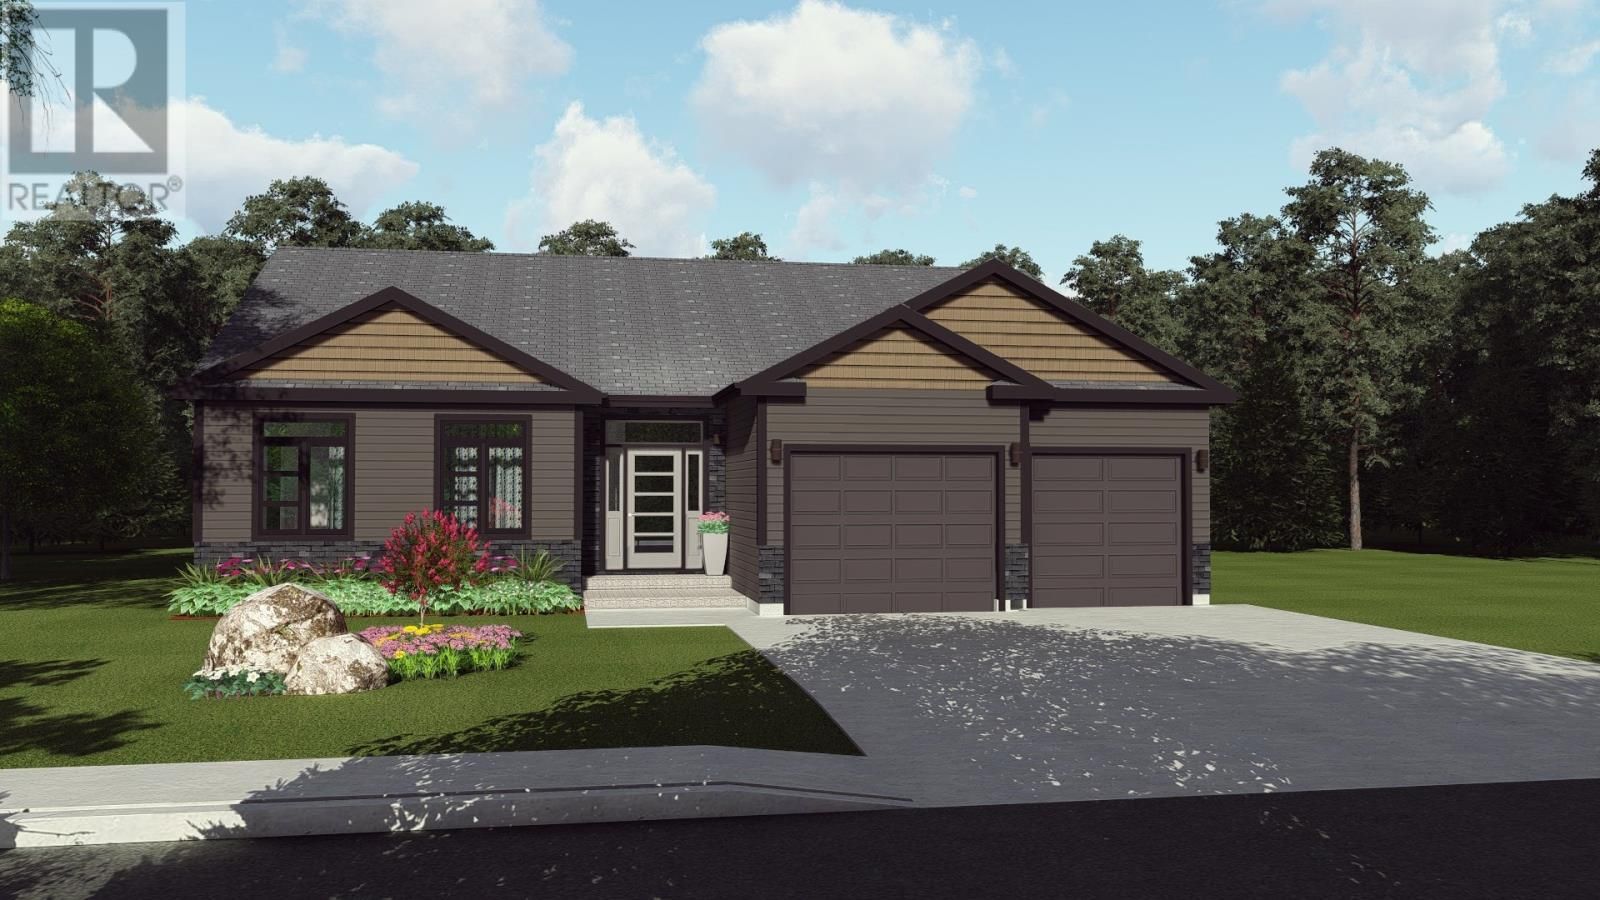 Main Photo: Lot 26 Buckingham Estates in Conception Bay South: House for sale : MLS®# 1257263